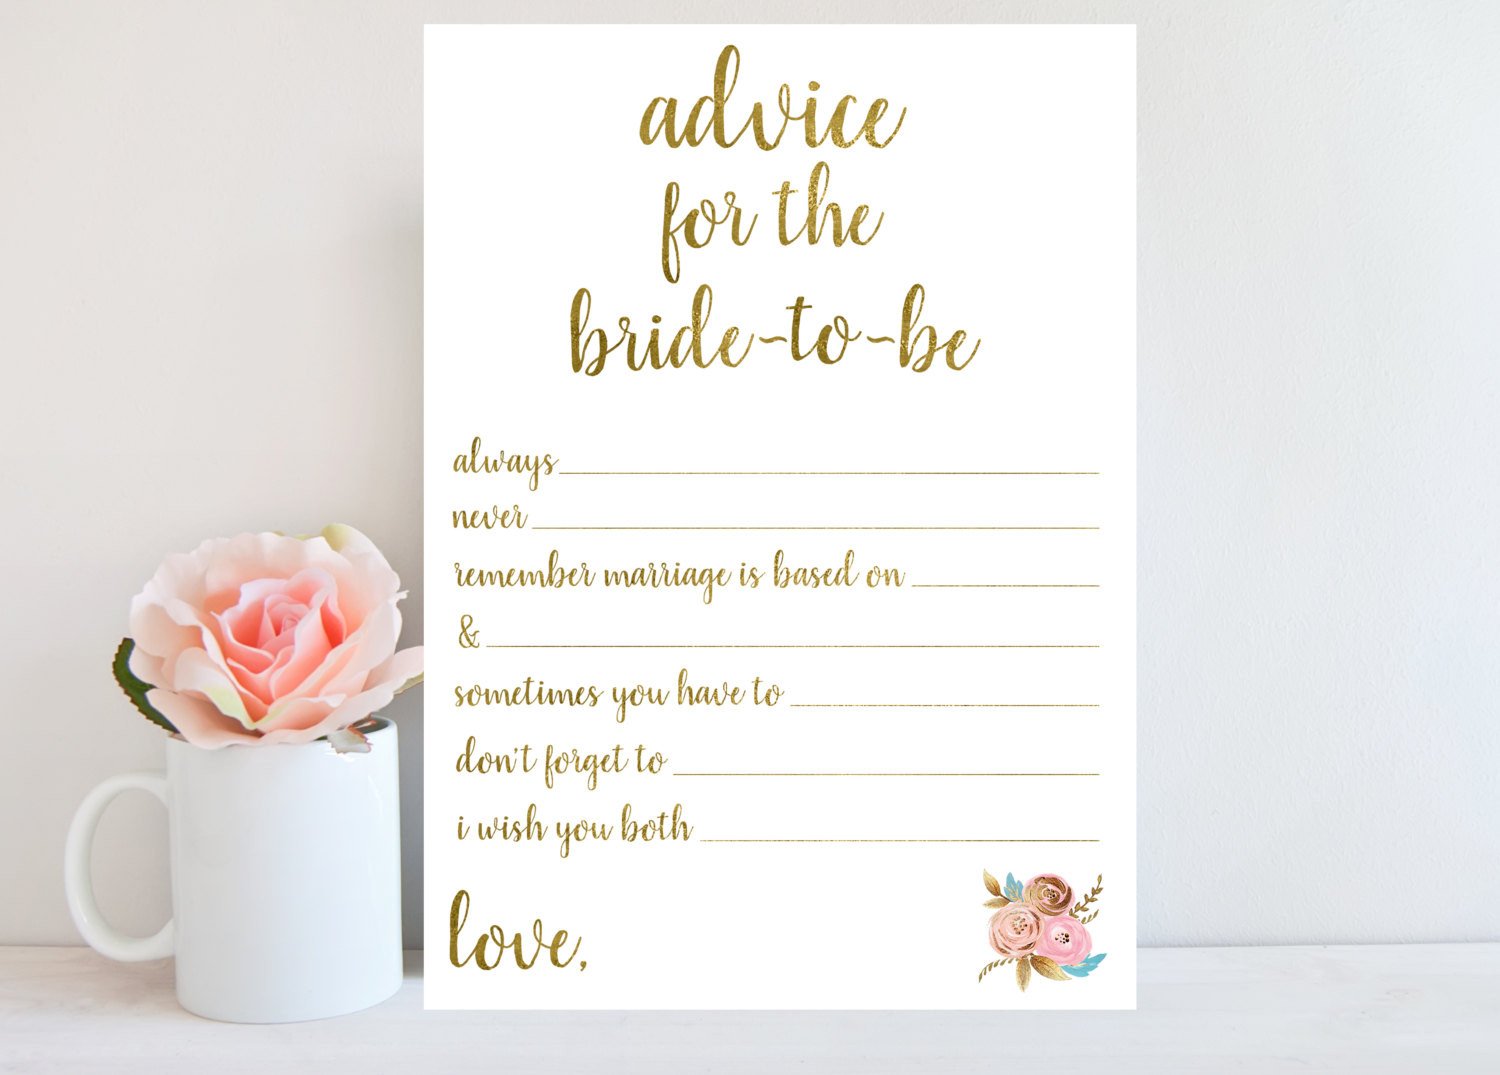 Advice for Bride to Be Bridal Shower Advice Cards Printable